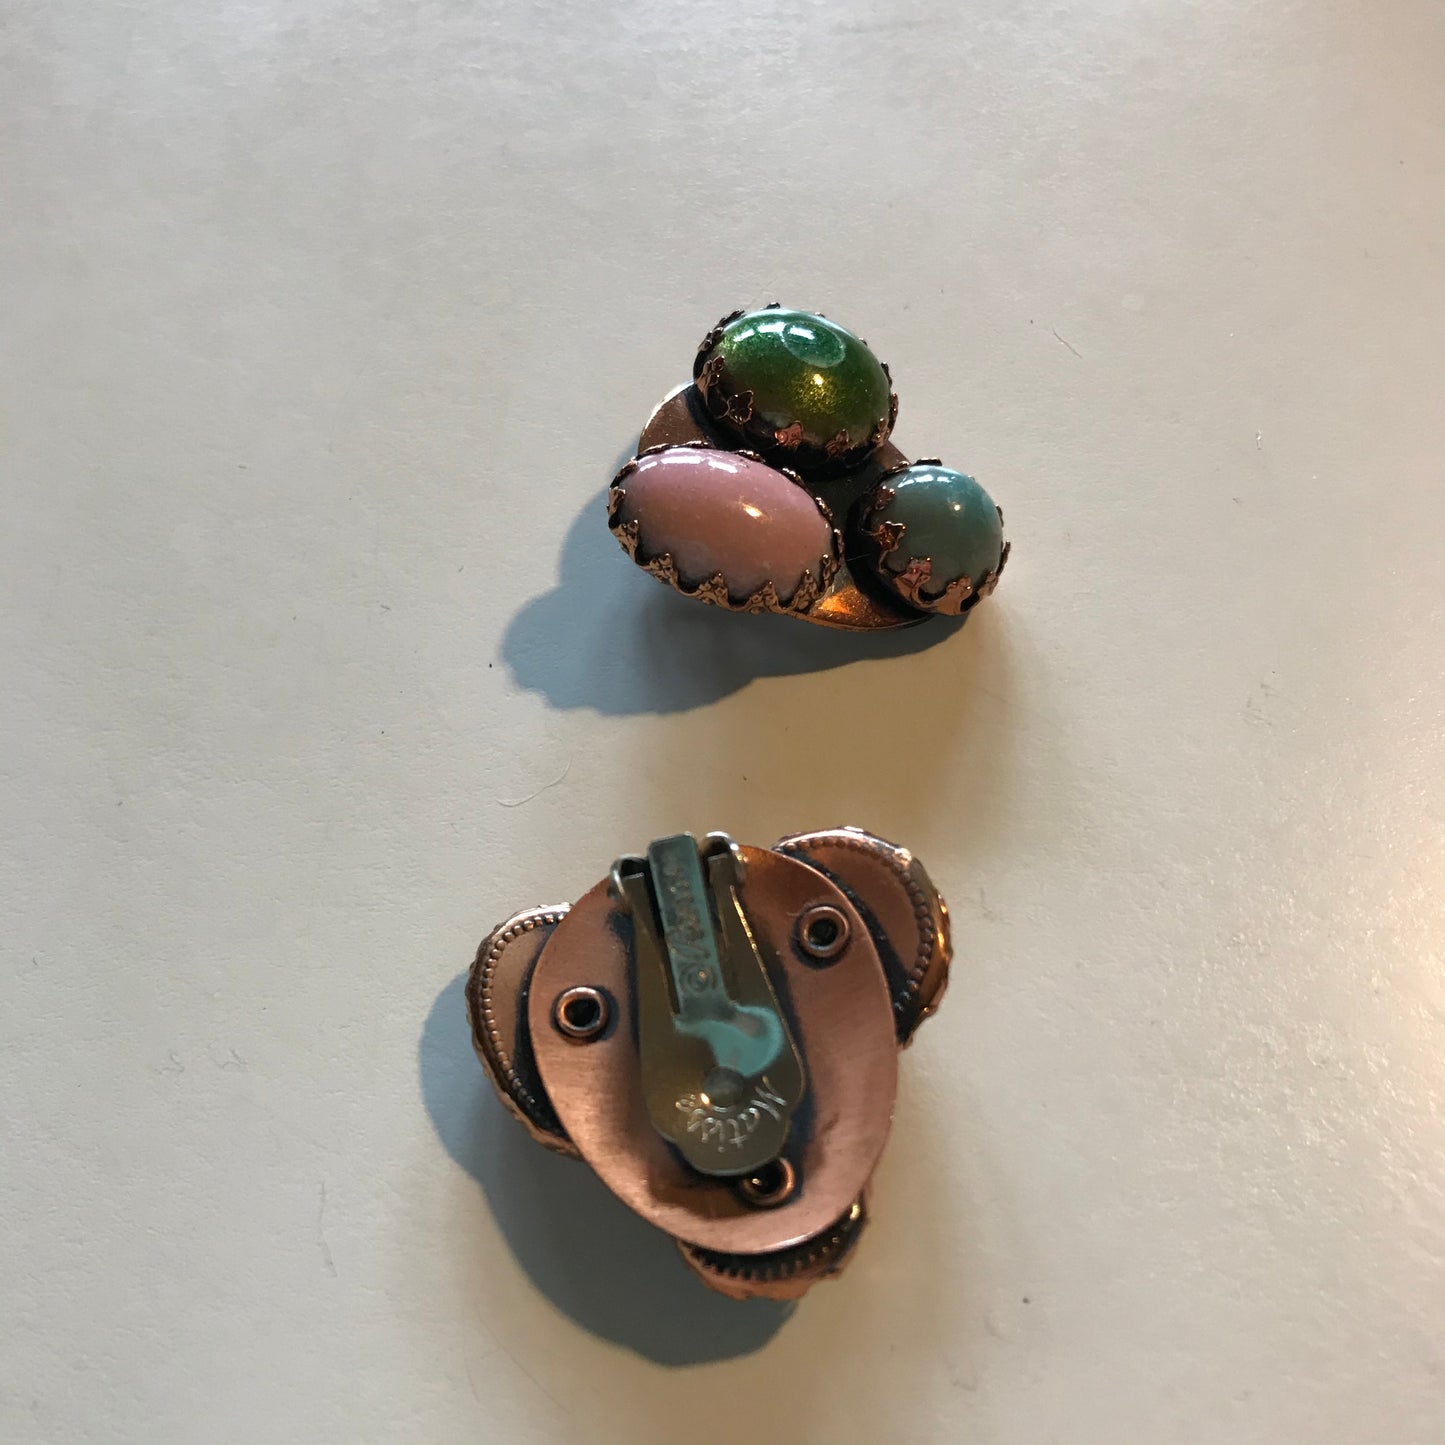 Candy Egg Enameled Copper Clip Earrings circa 1940s